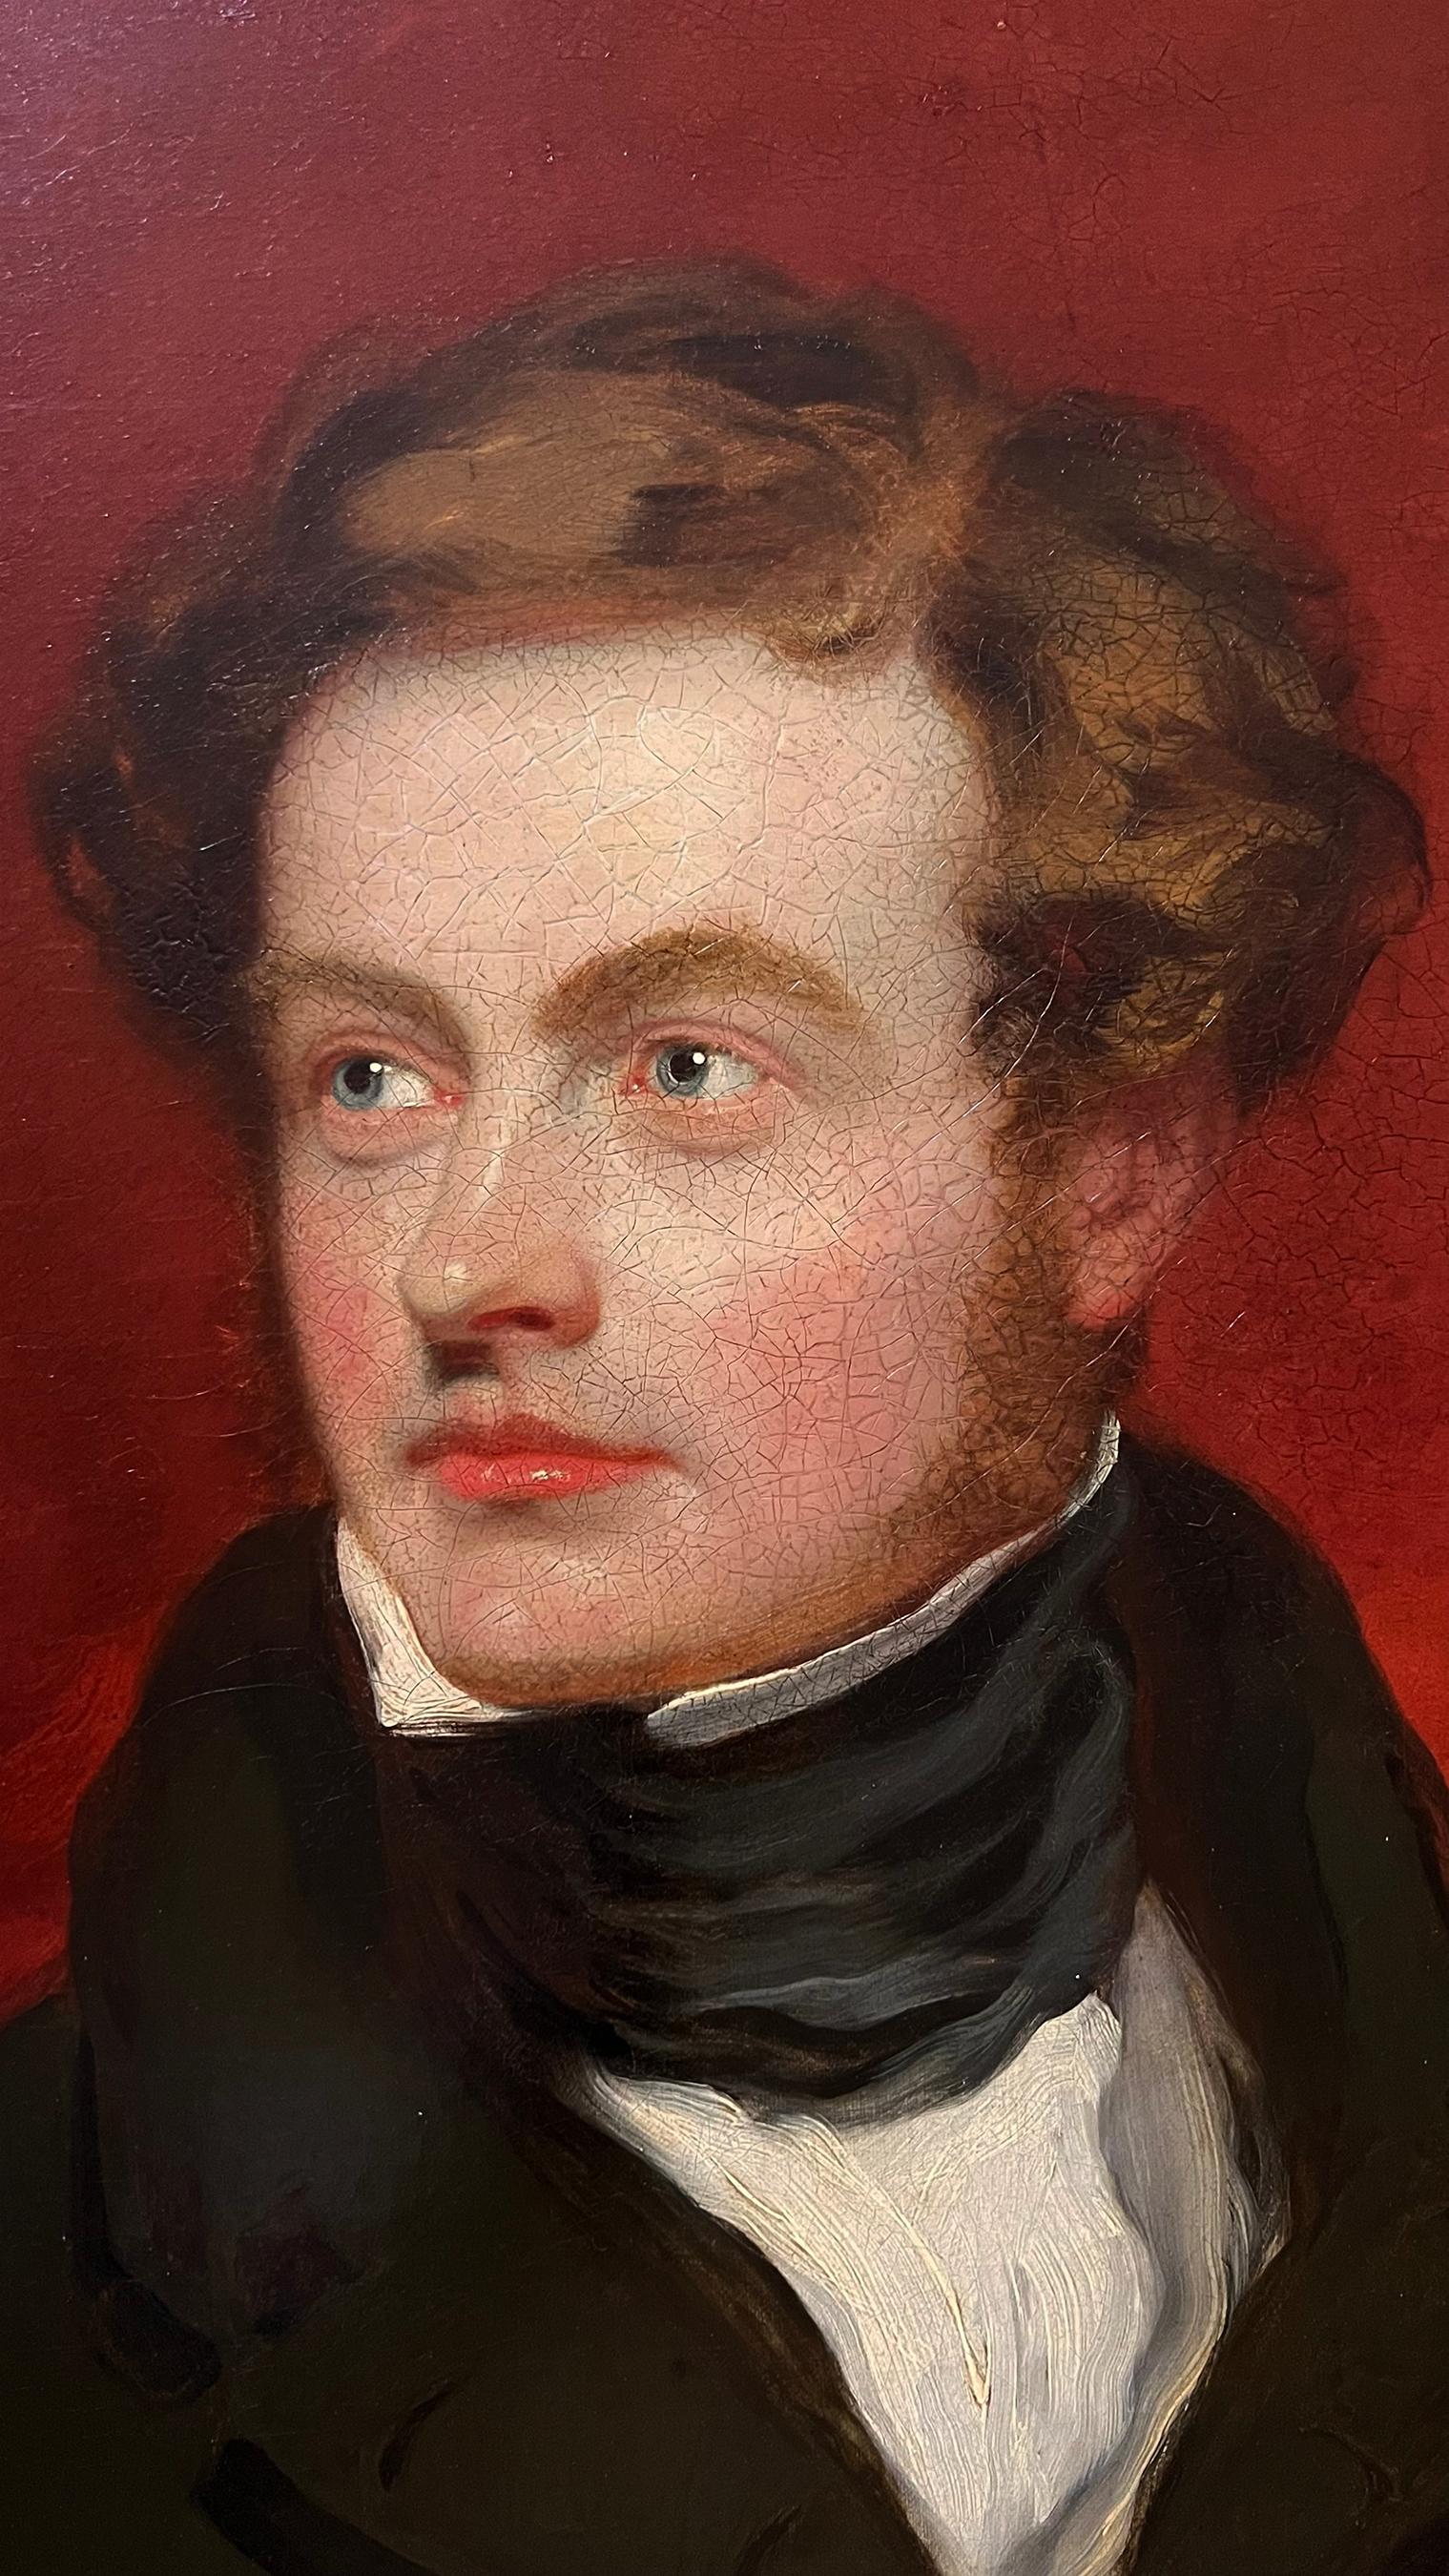 A handsome Regency or early Victorian blue-eyed gentleman from the school of Sir Thomas Lawrence (1769-1830). The fashionably dressed young man sports a frock coat with a high collar and charcoal silk cravat. He wears his auburn hair a windswept